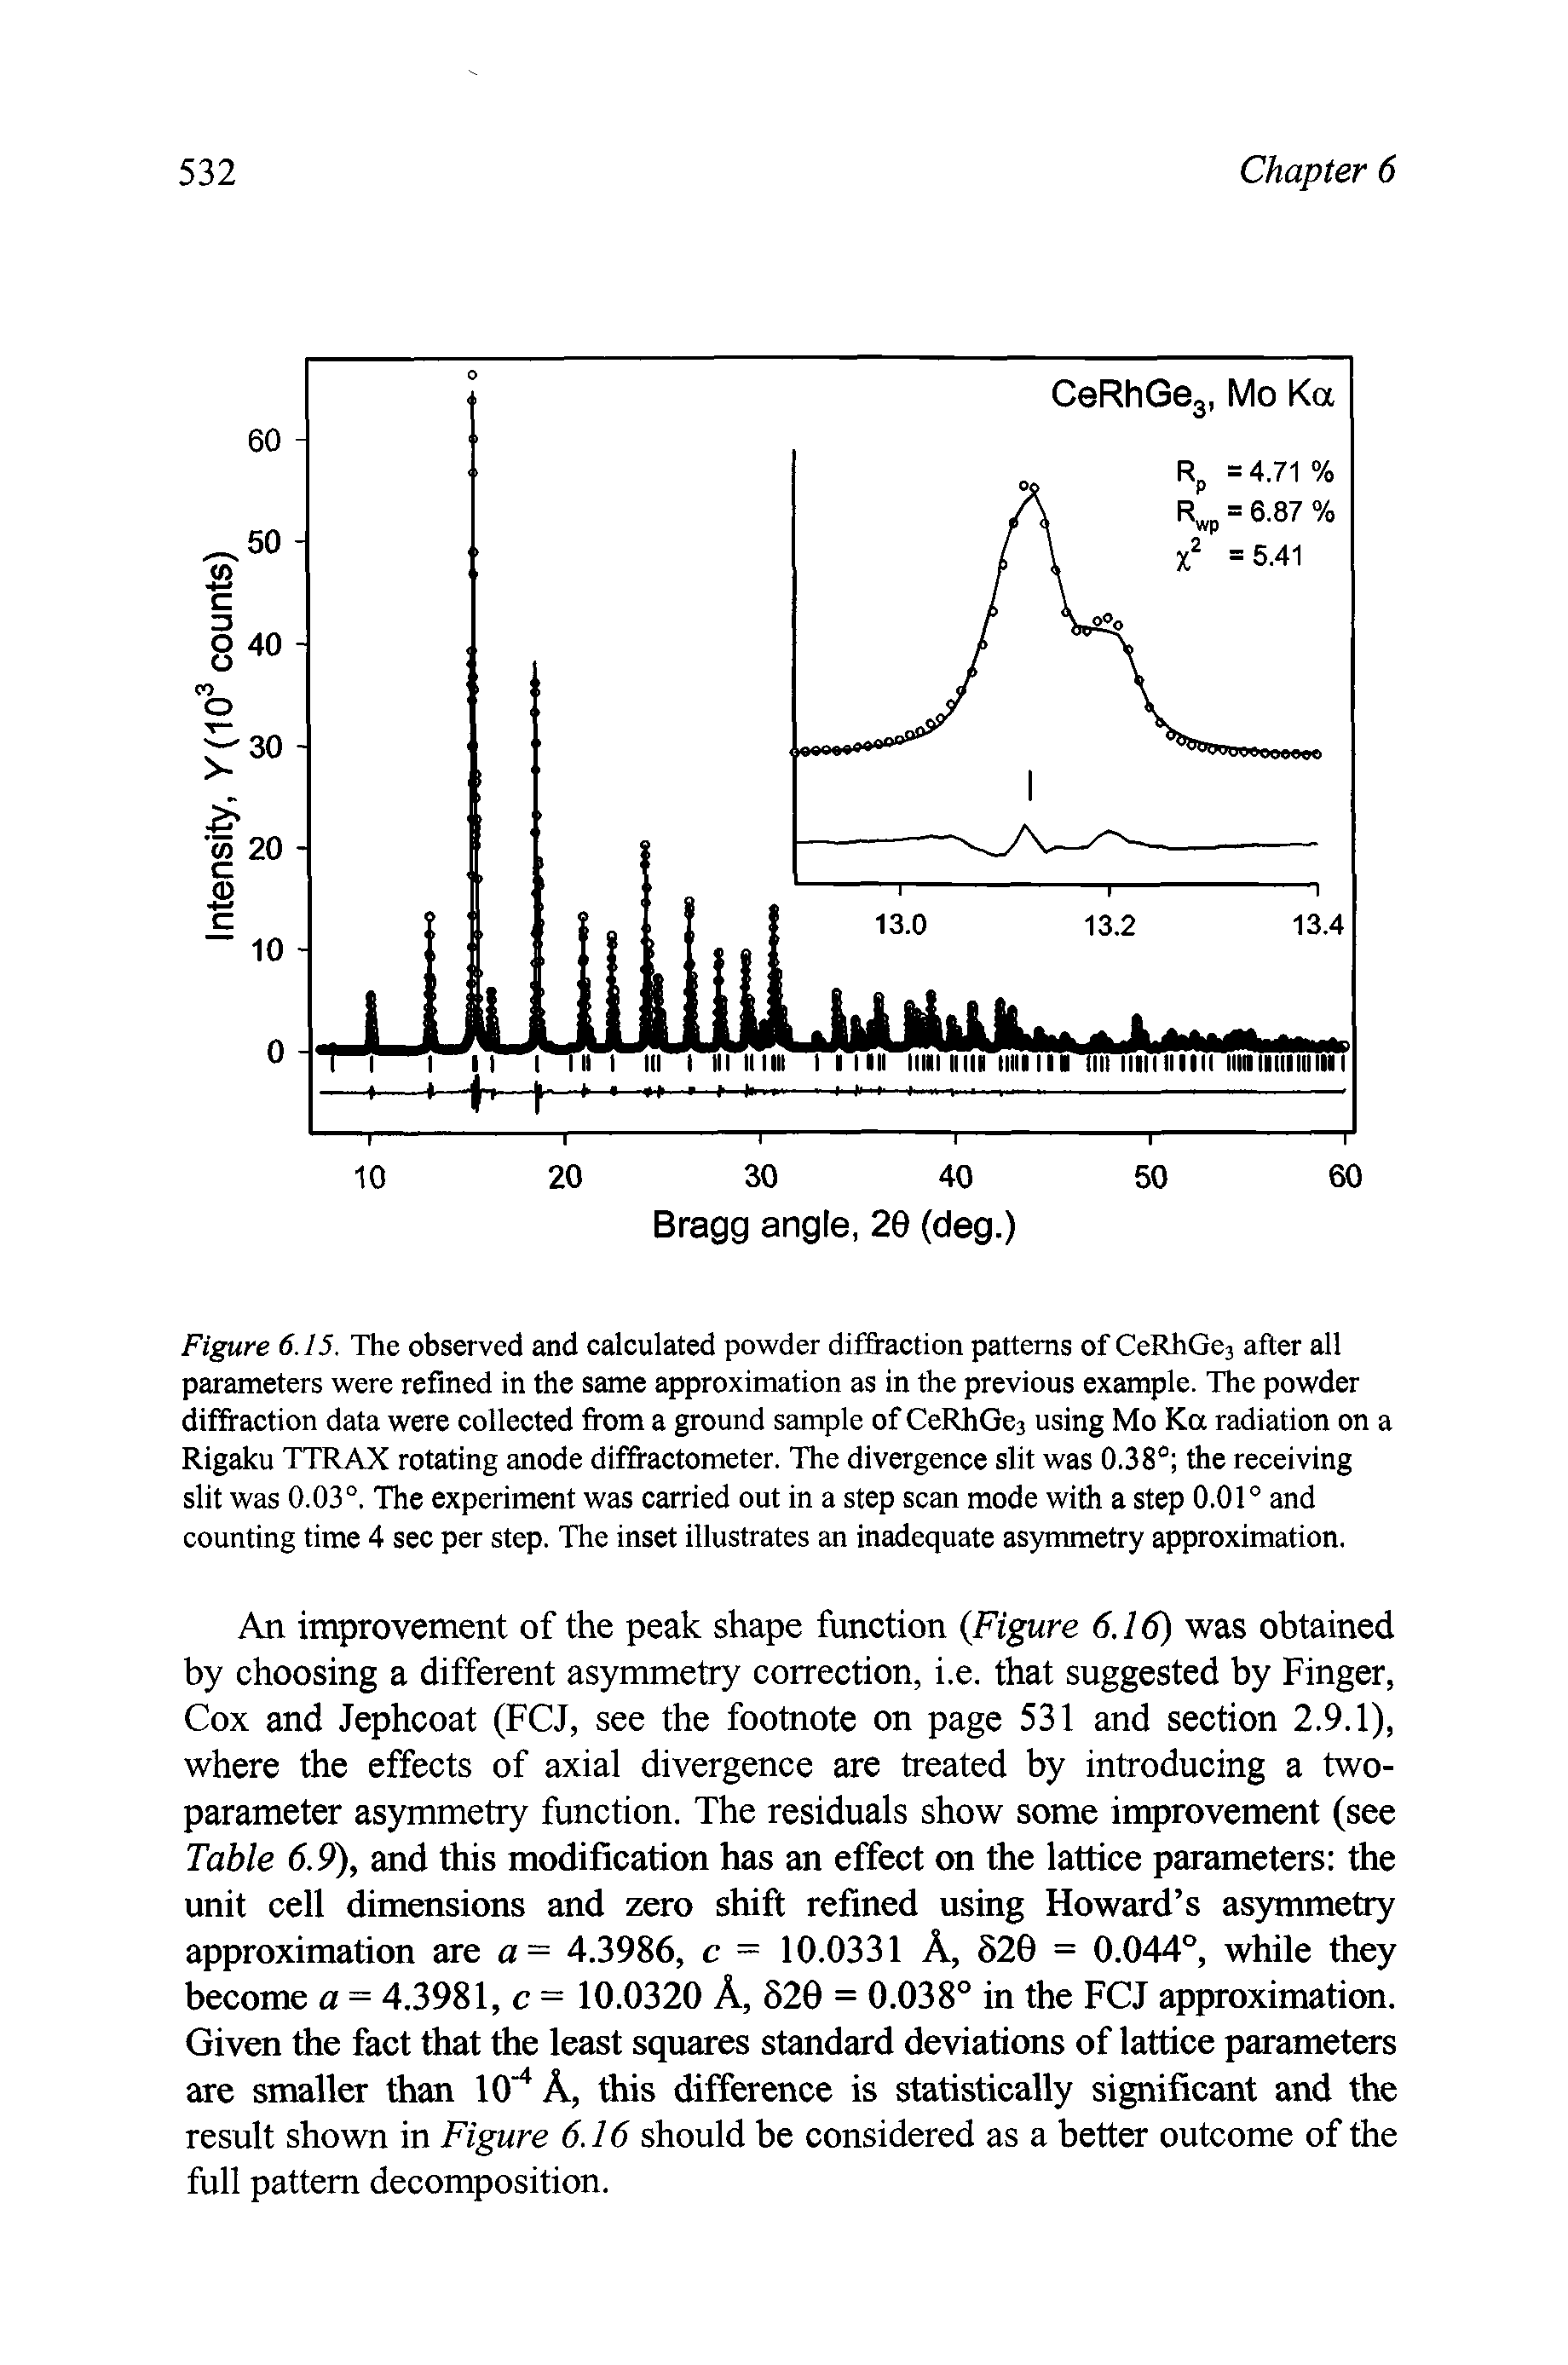 Figure 6.15. The observed and calculated powder diffraction patterns of CeRhGea after all parameters were refined in the same approximation as in the previous example. The powder diffraction data were collected from a ground sample of CeRhGes using Mo Ka radiation on a Rigaku TTRAX rotating anode diffractometer. The divergence slit was 0.38° the receiving slit was 0.03°. The experiment was carried out in a step scan mode with a step 0.01° and counting time 4 sec per step. The inset illustrates an inadequate asymmetry approximation.